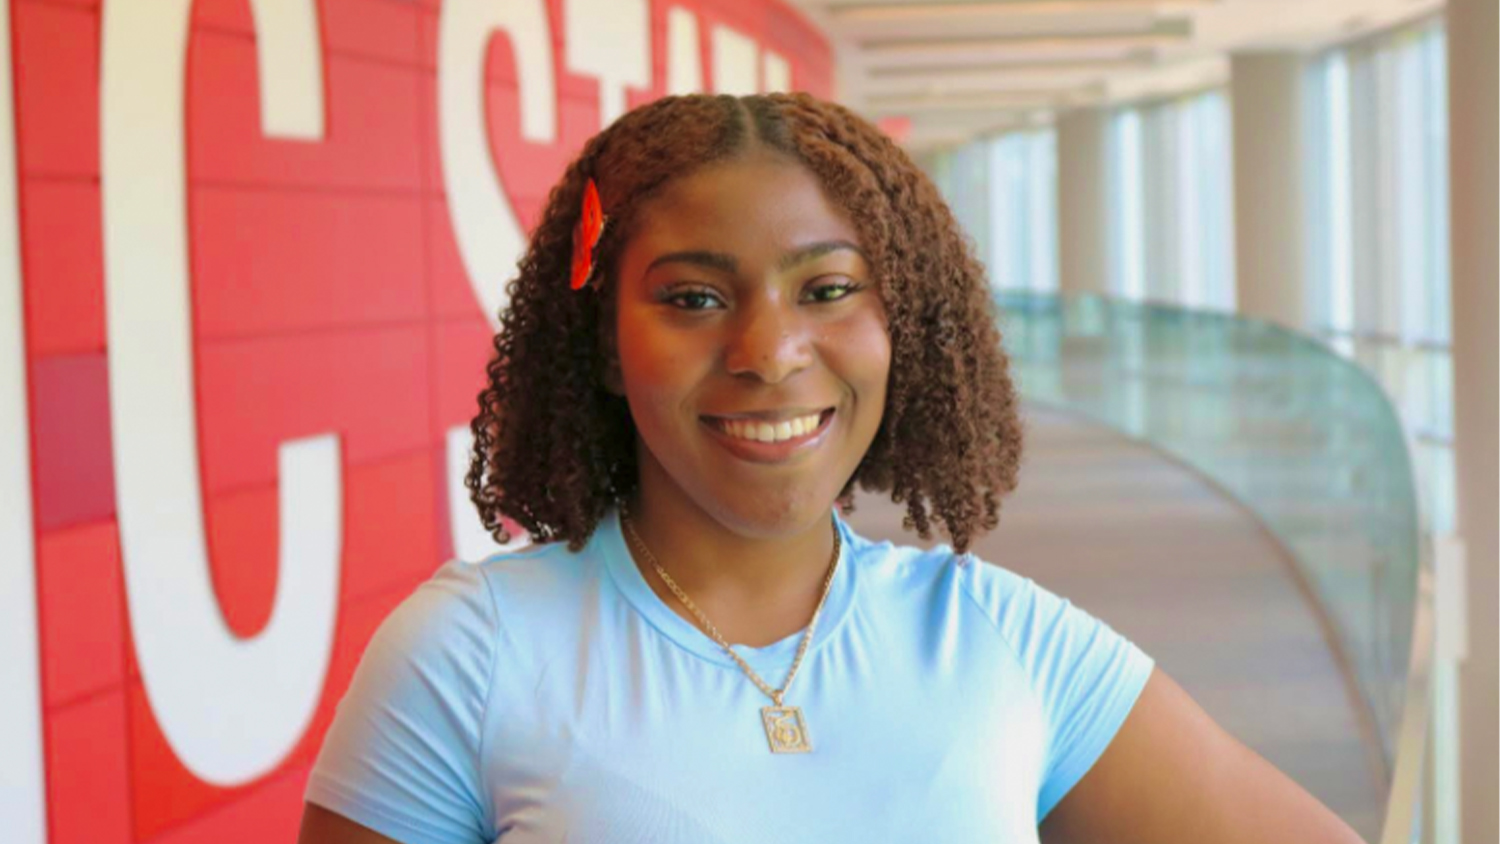 London Tolson in front of a red wall with the NC State logo on it